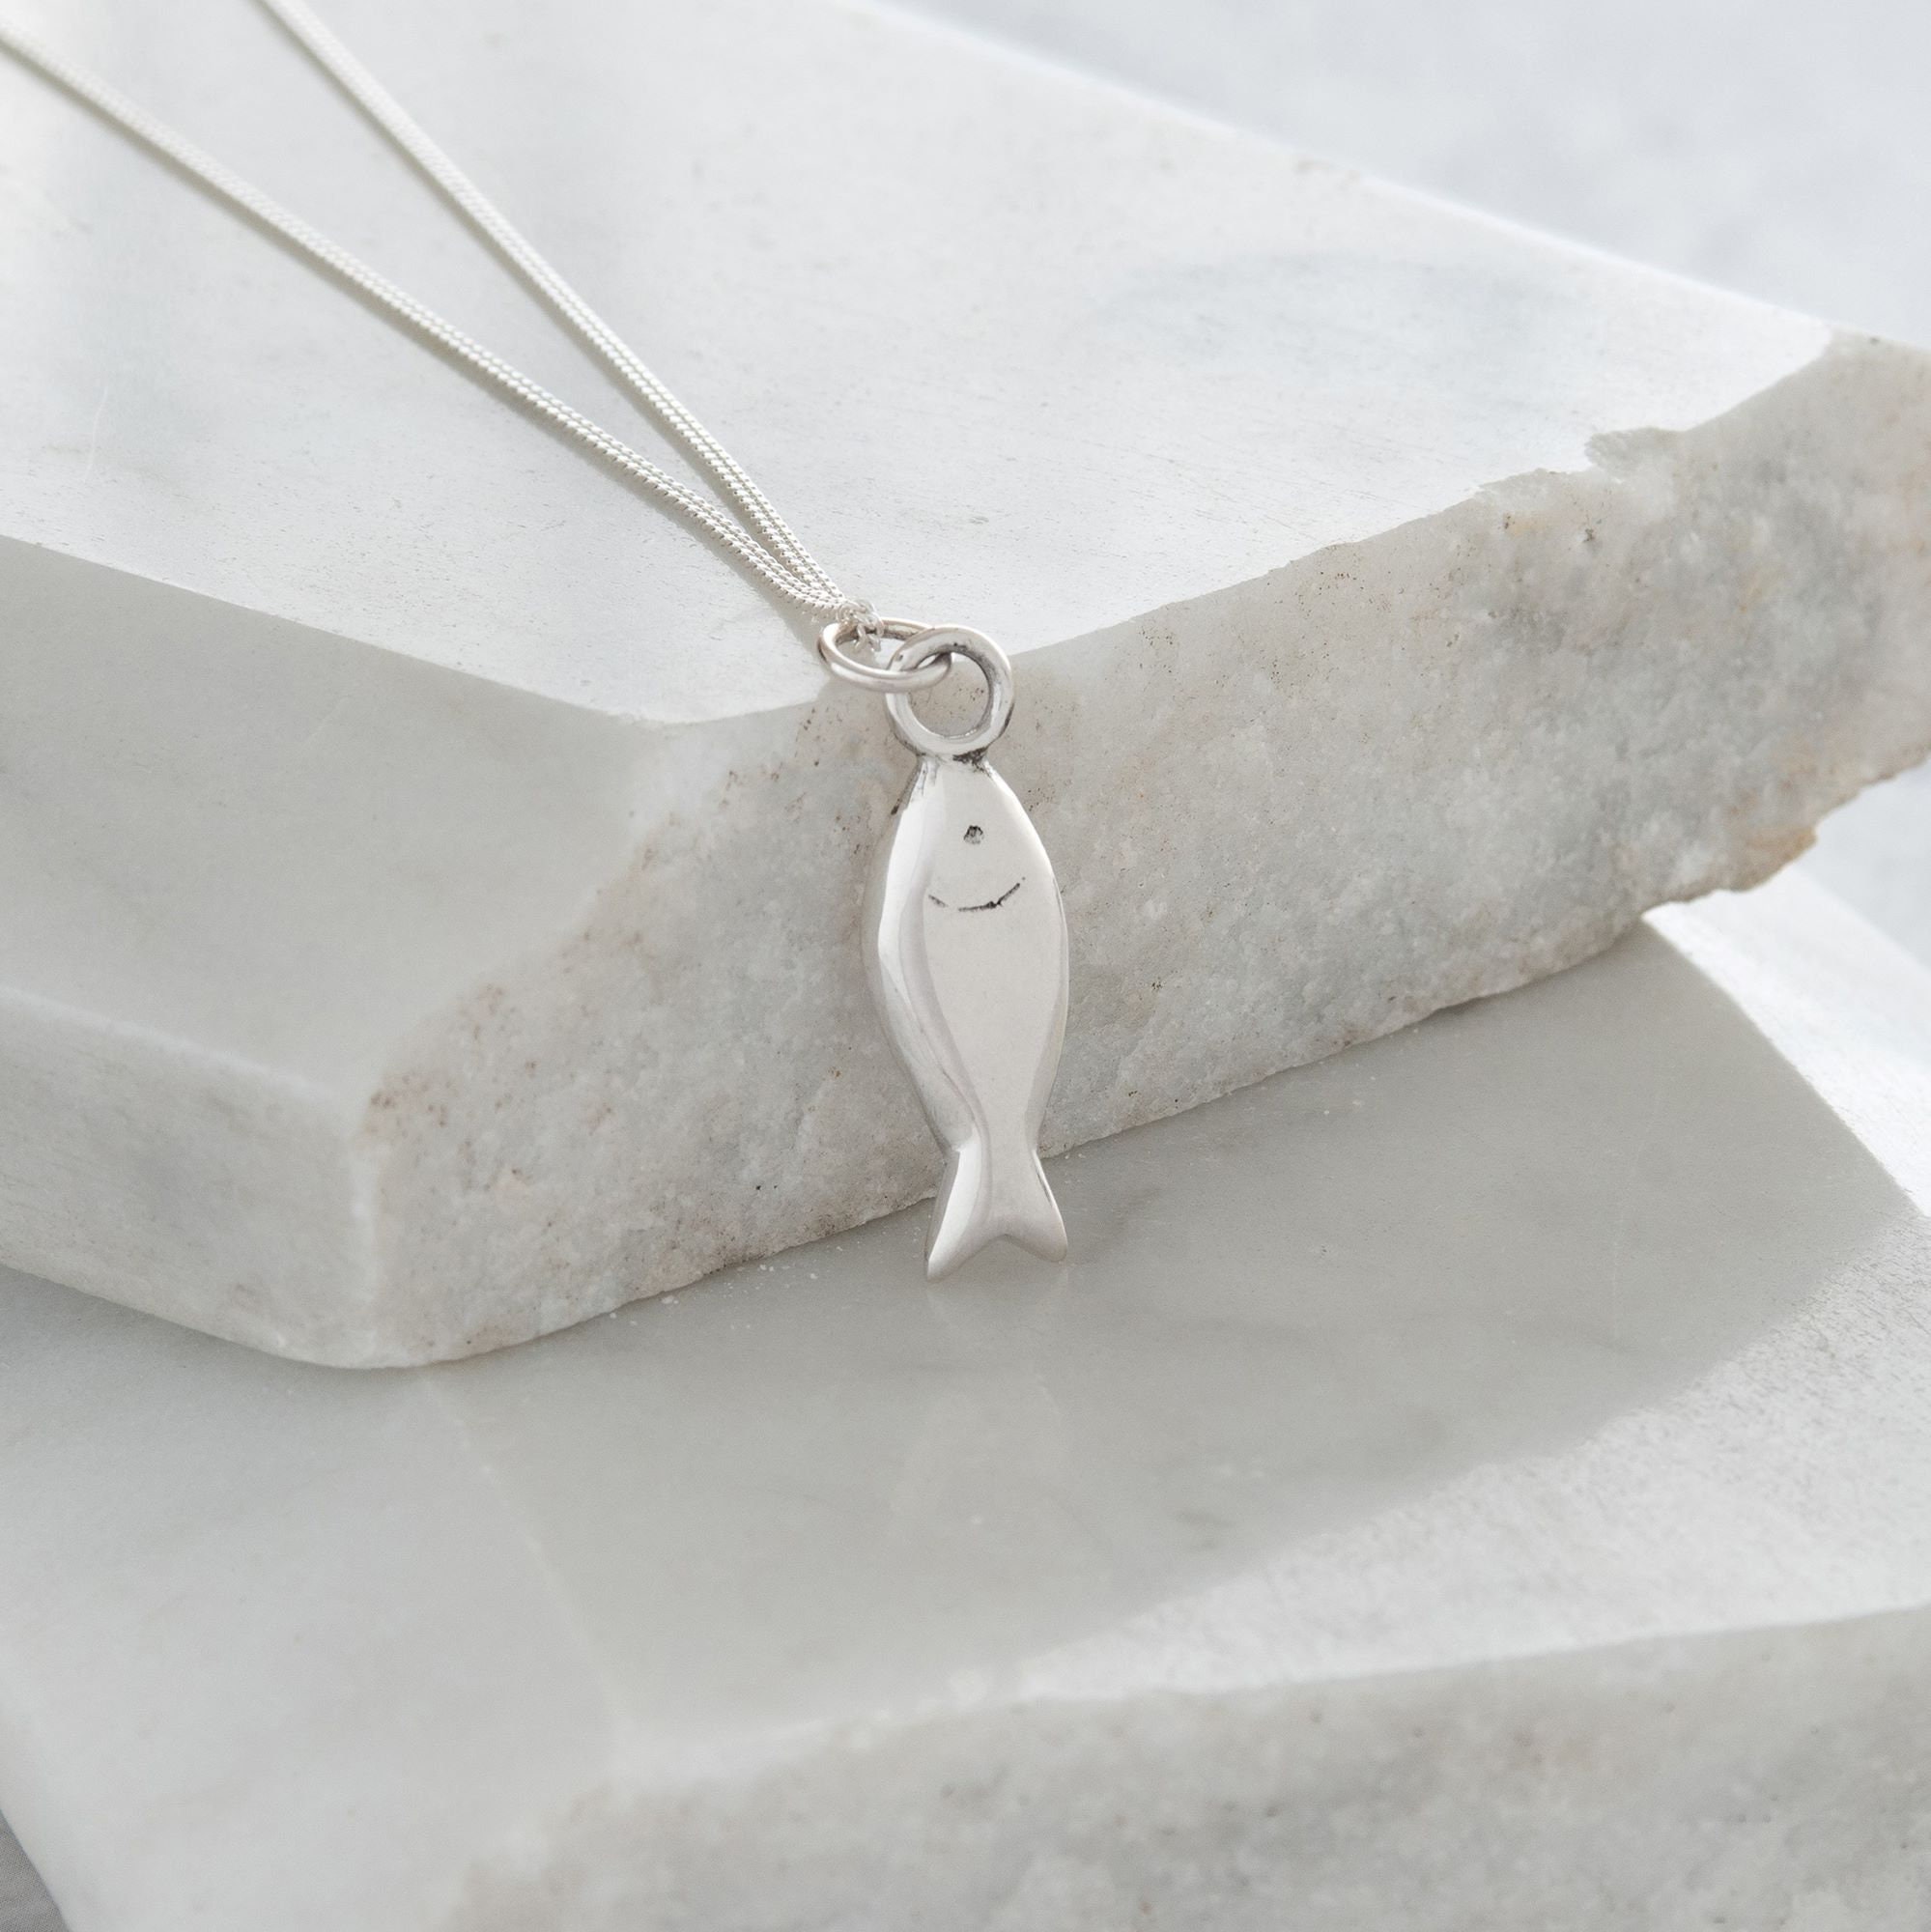 Buy Fish Pendant Necklace Sterling Silver Online in India 